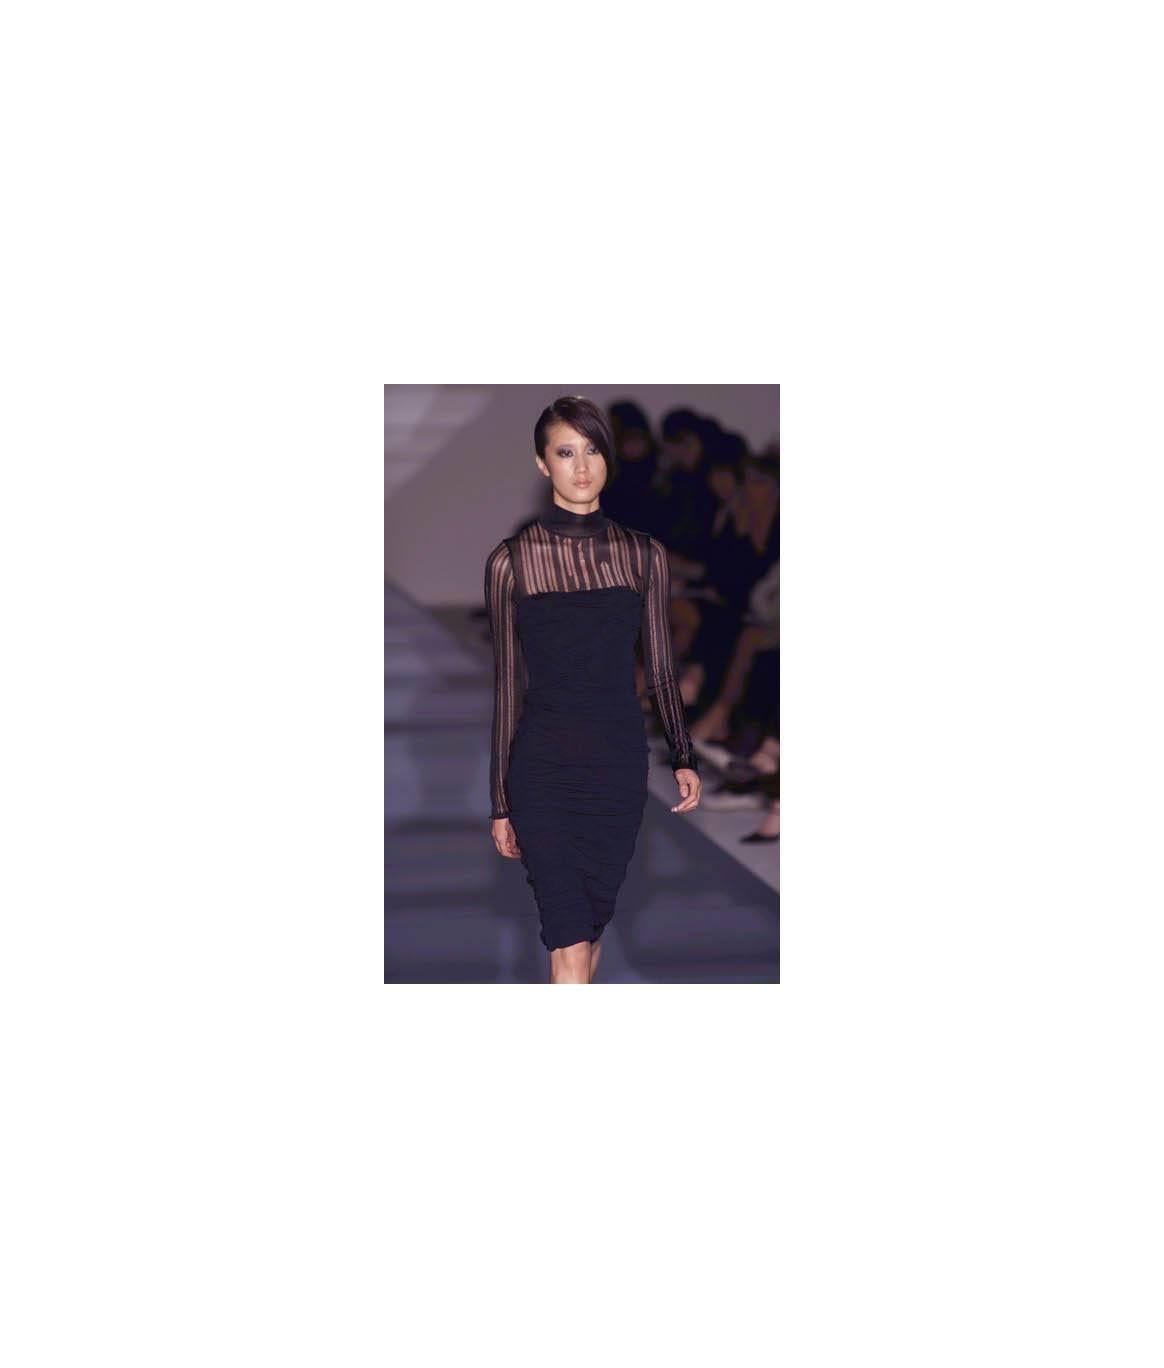 Women's Amazing Black Ruched Silk Dress From Tom Ford Gucci SS 2001 Runway Collection!